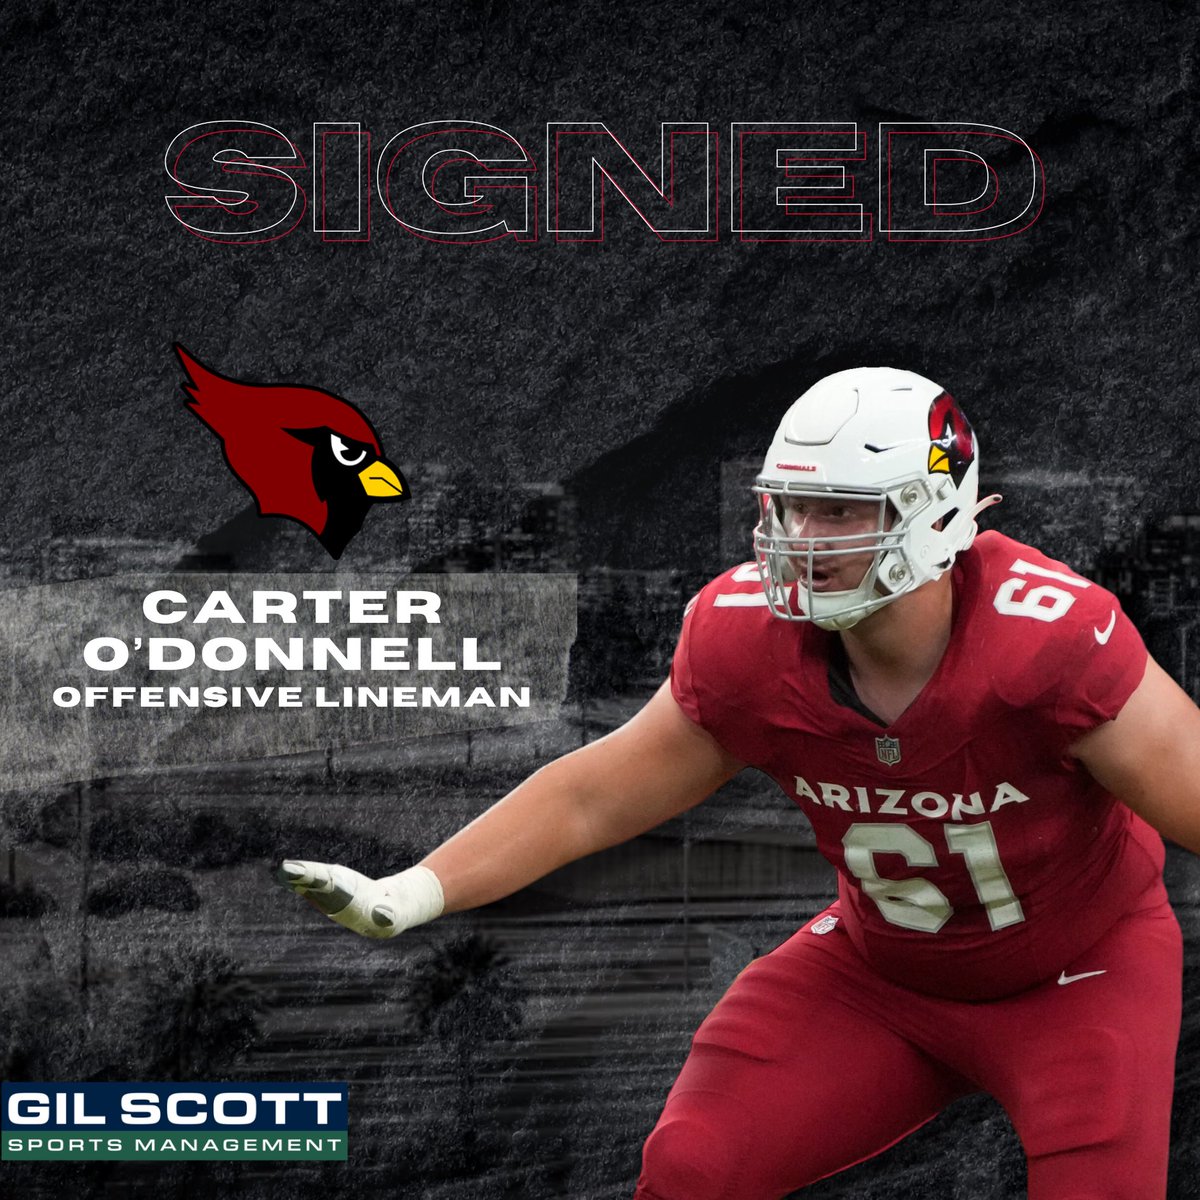 Congrats to Carter O’Donnell on signing back with the @AZCardinals!